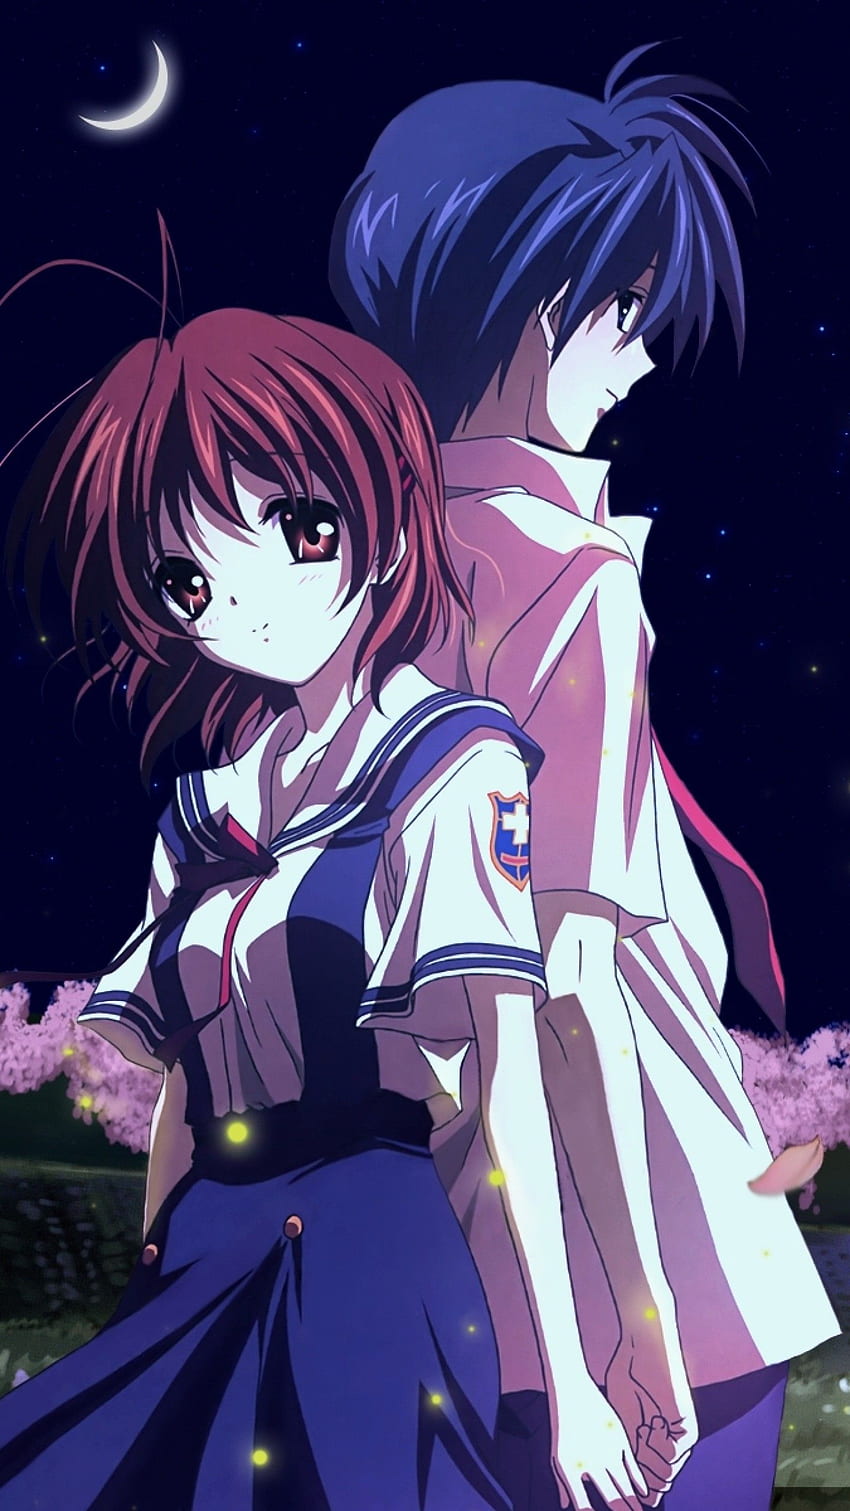 40 Anime Quotes From Clannad You'll Understand If You Watched The Anime